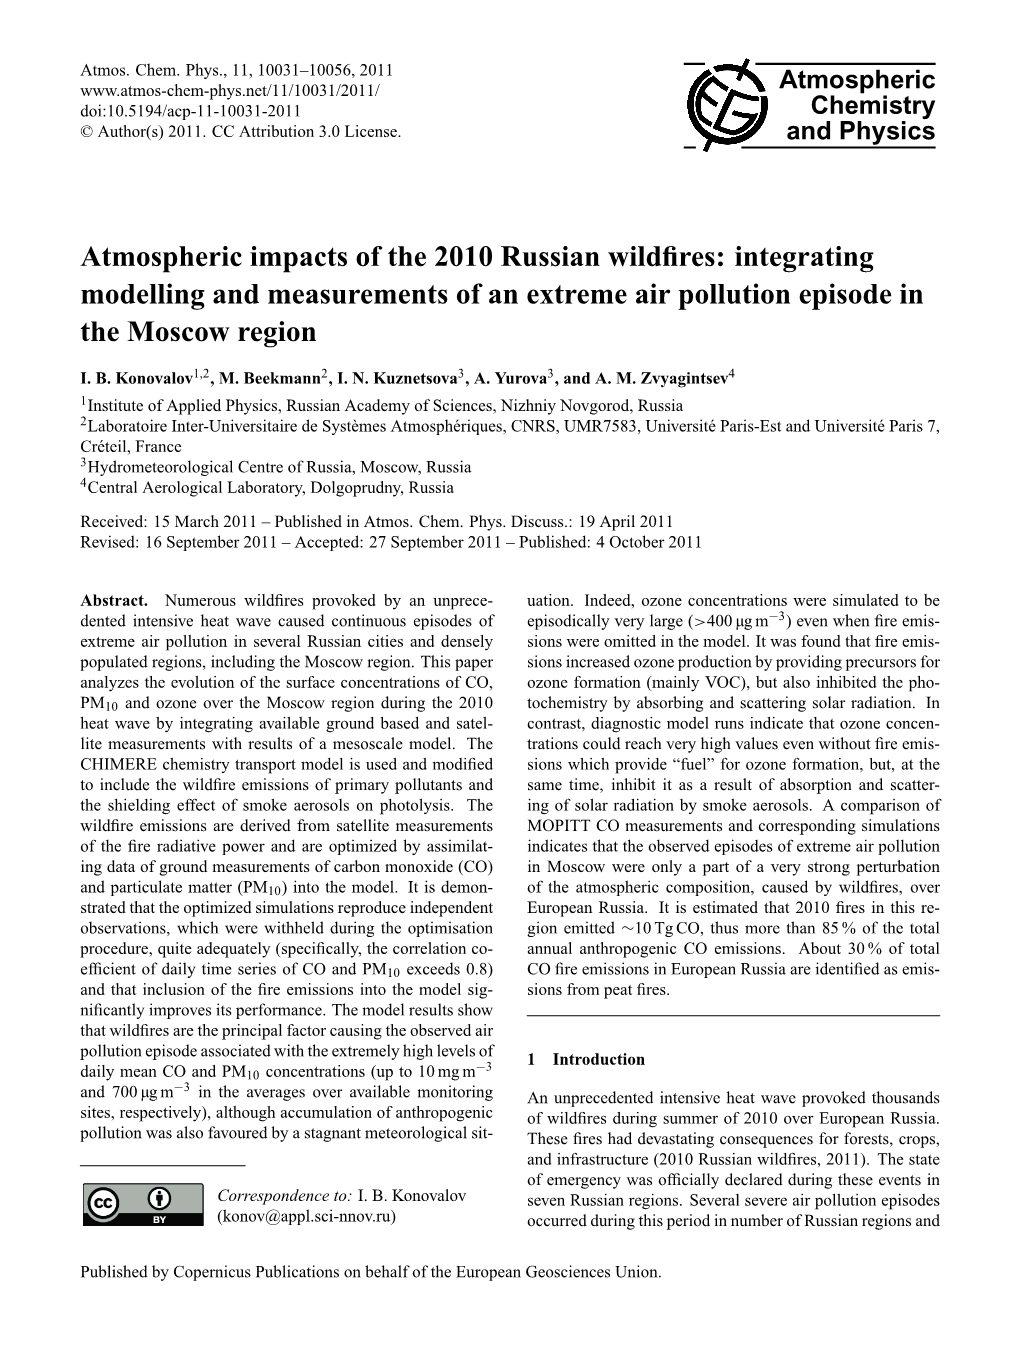 Atmospheric Impacts of the 2010 Russian Wildfires: Integrating